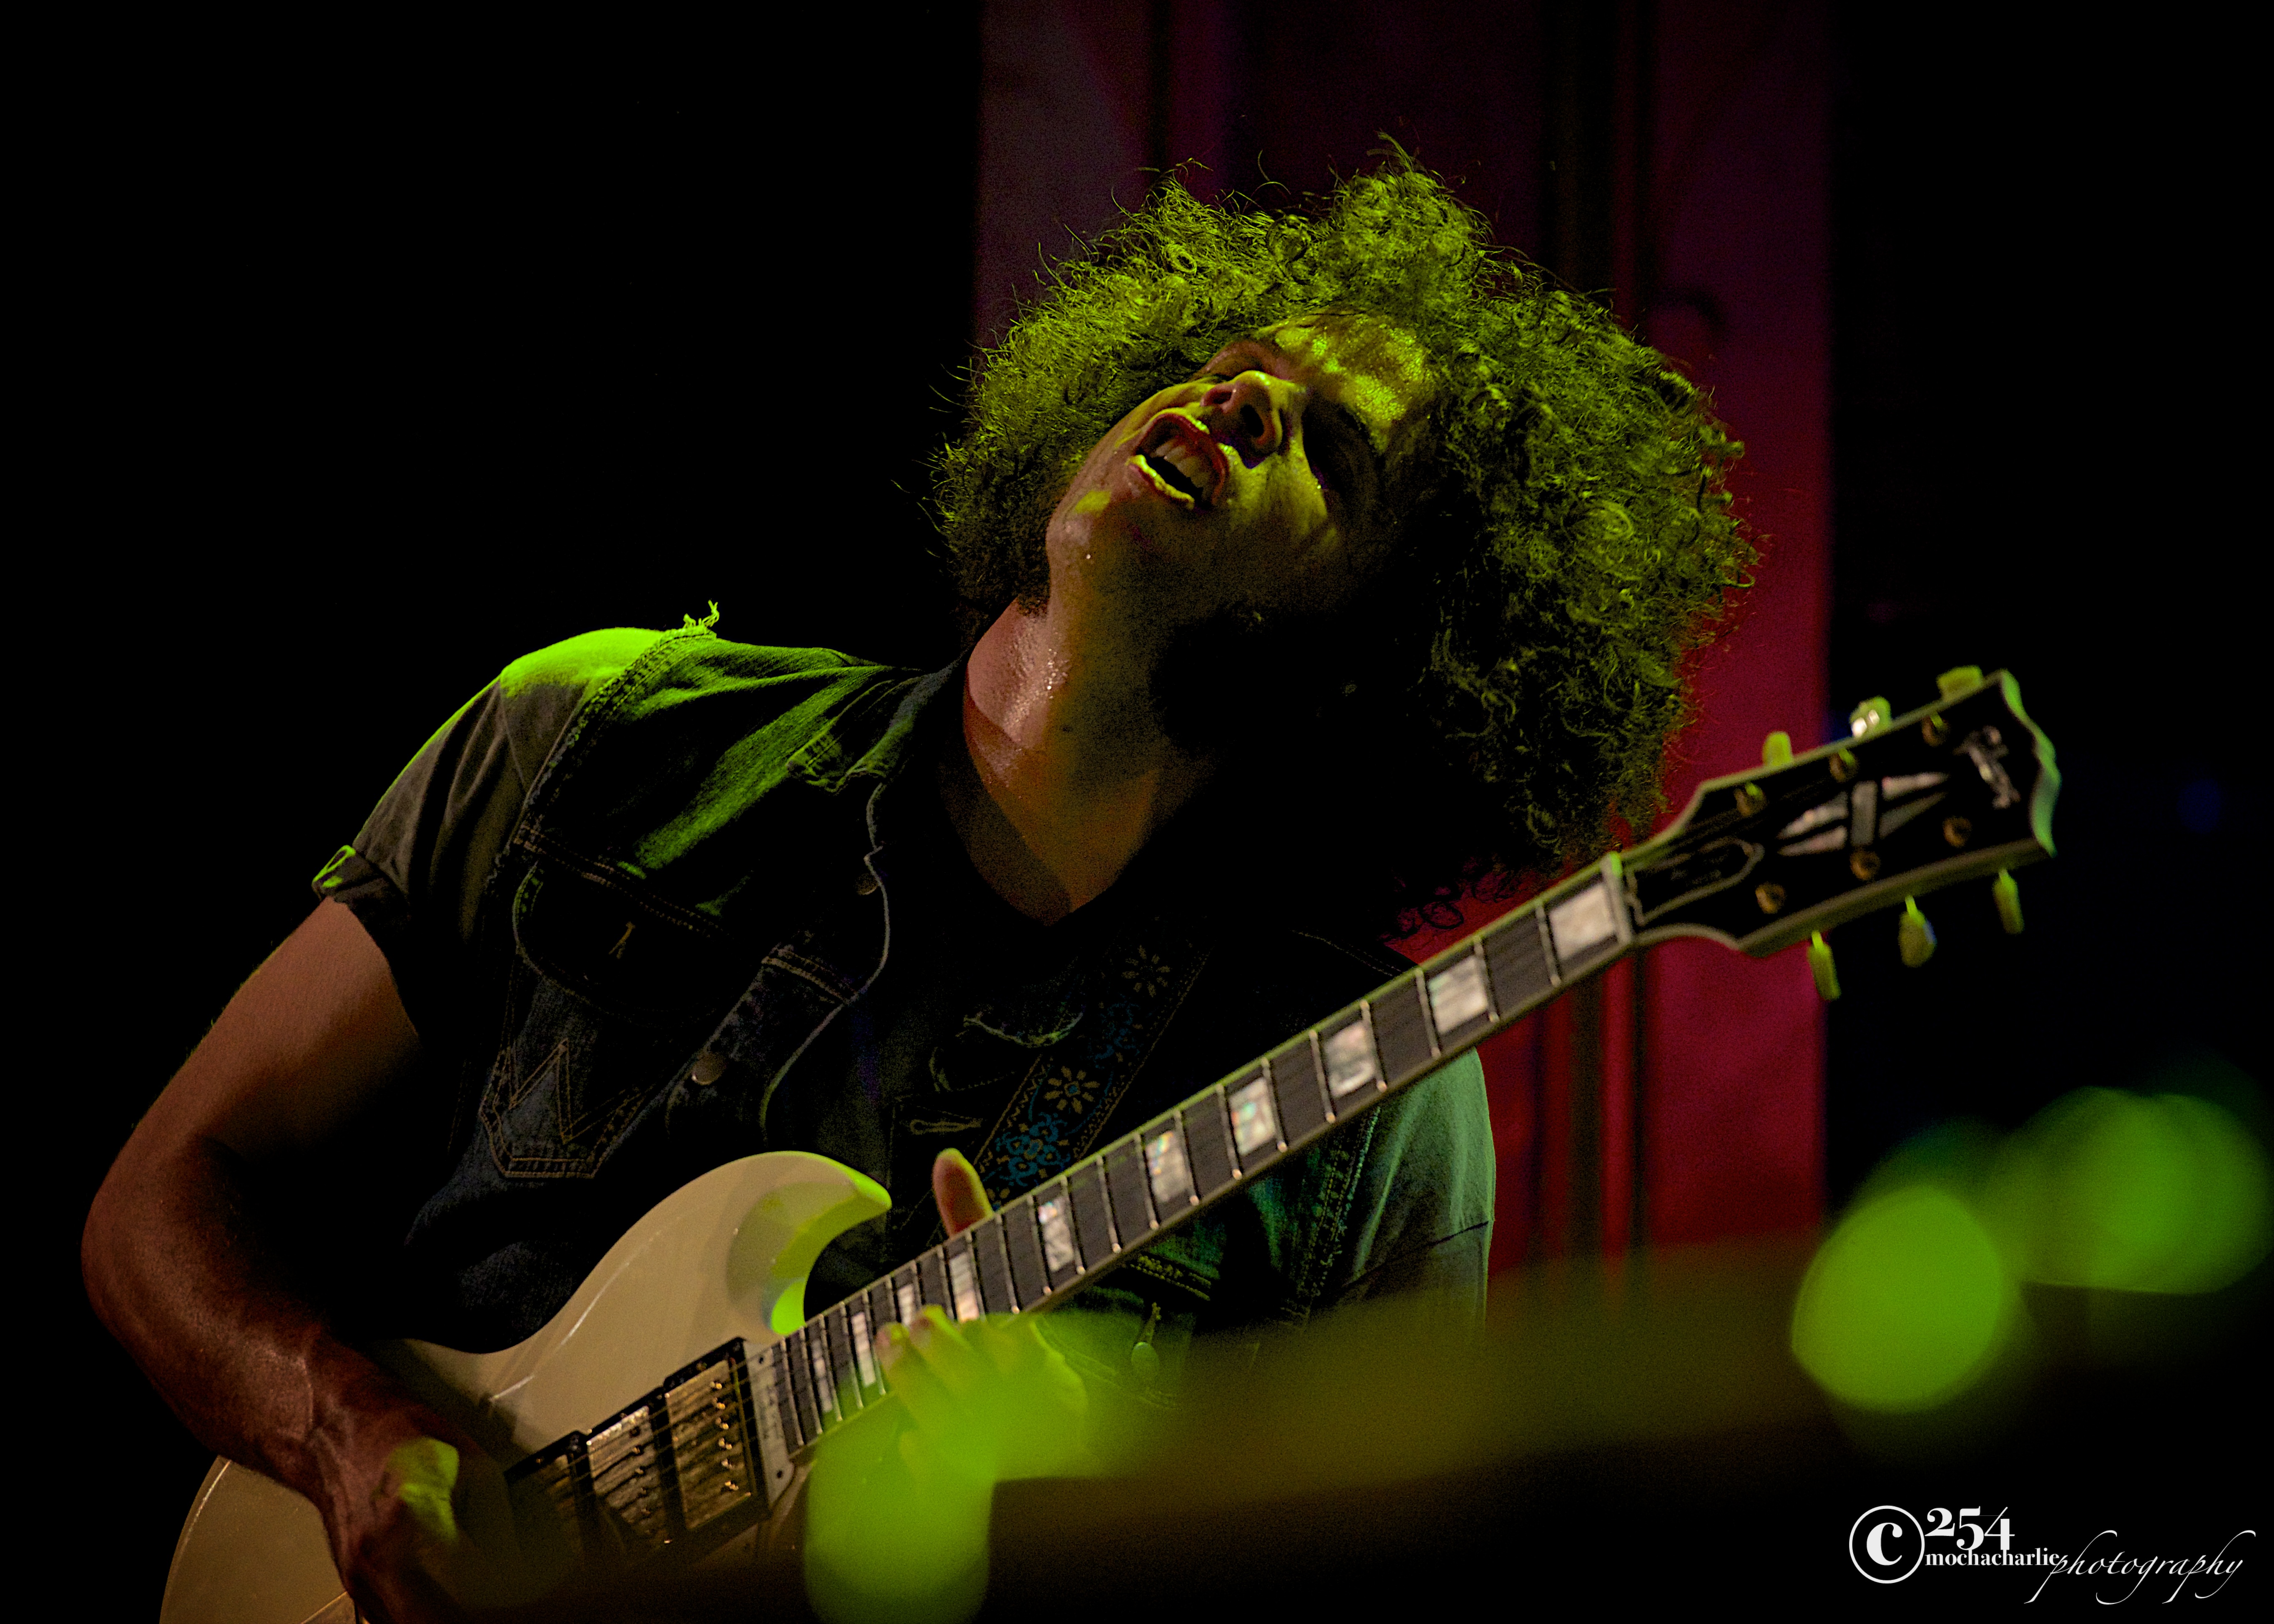 Wolfmother at The Neptune (Photo by Mocha Charlie)